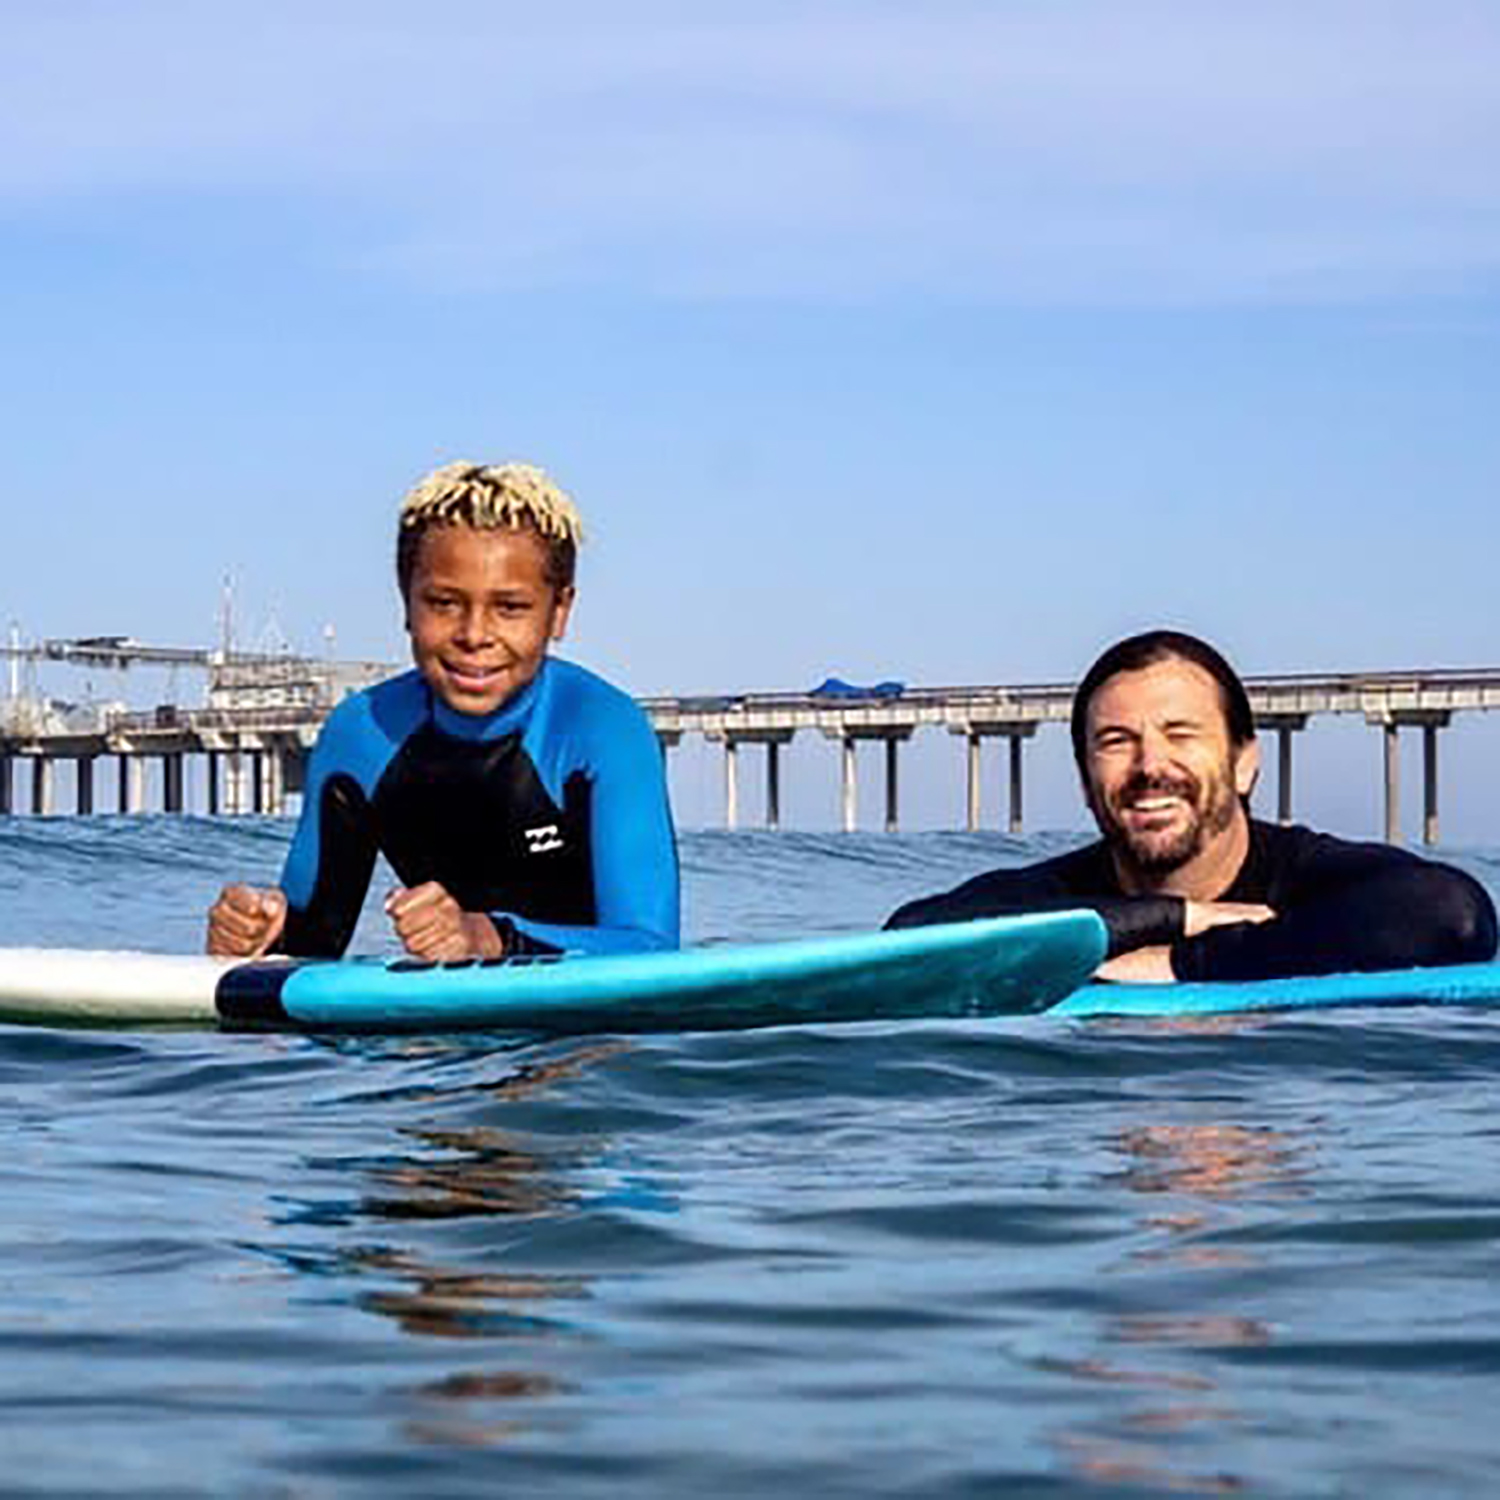 A man and a boy in wetsuits float on a surfboard near a pier